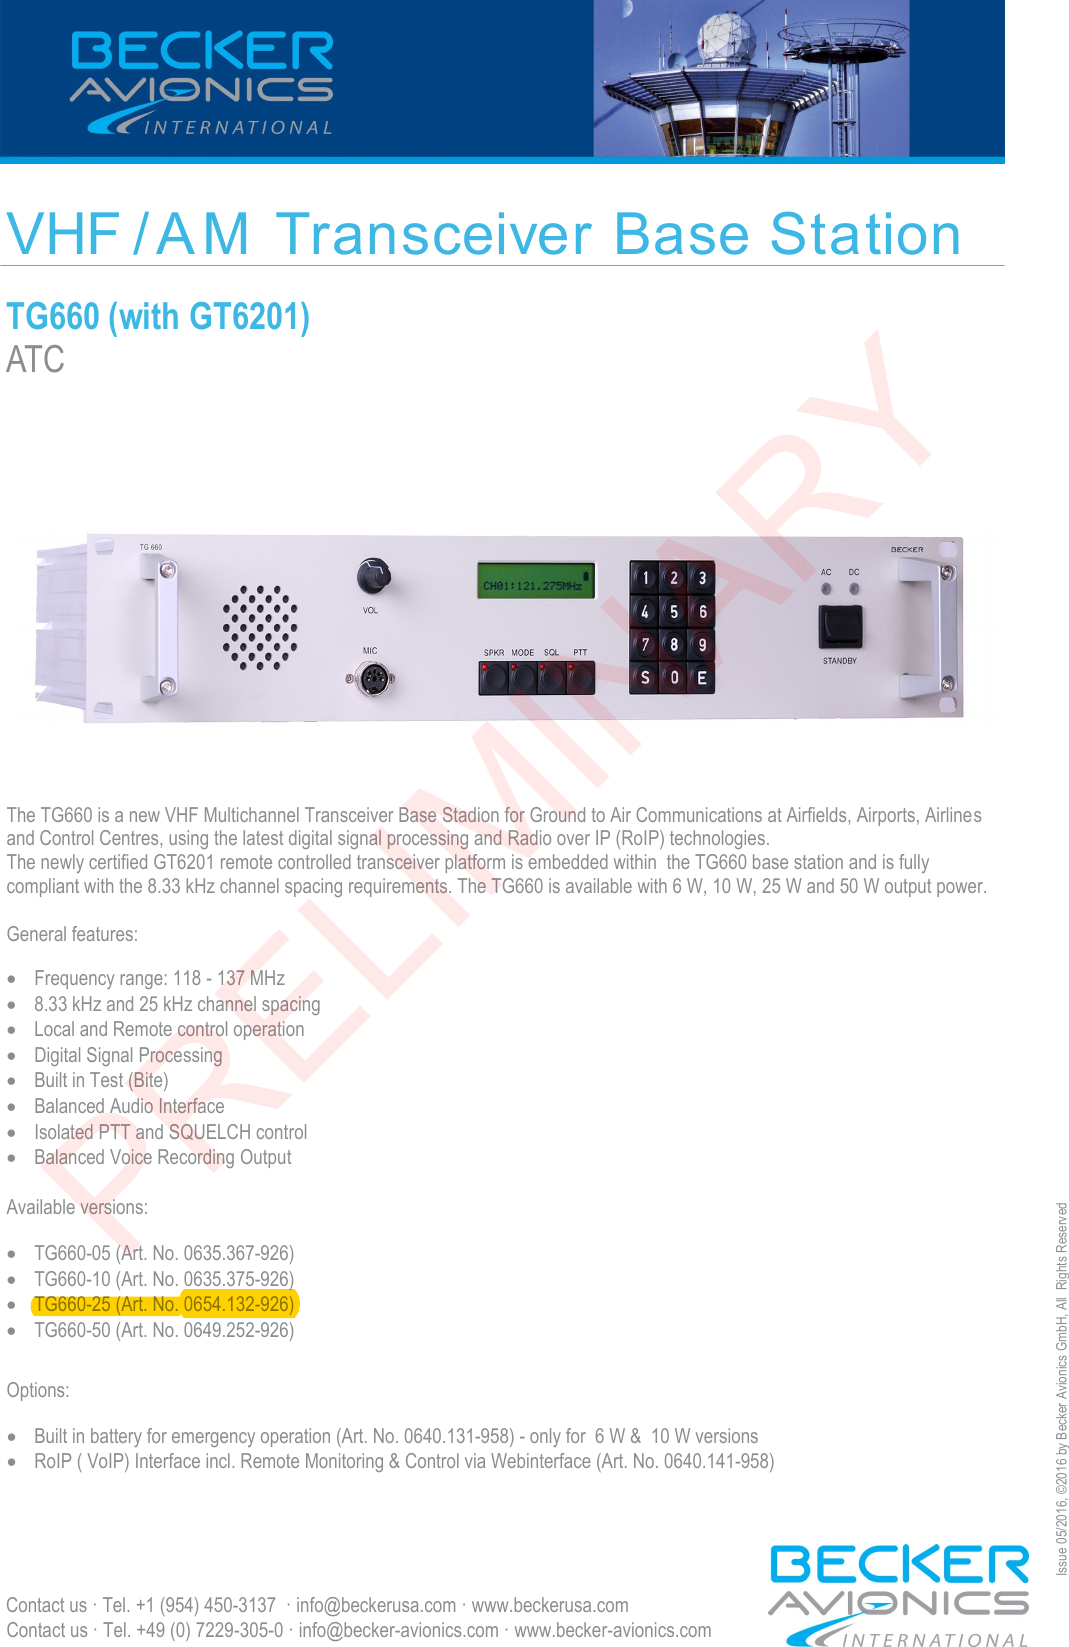 VHF / A M  Transceiver Base Station TG660 (with GT6201) ATC Contact us · Tel. +49 (0) 7229-305-0 · info@becker-avionics.com · www.becker-avionics.com Issue 05/2016, ©2016 by Becker Avionics GmbH, All  Rights Reserved The TG660 is a new VHF Multichannel Transceiver Base Stadion for Ground to Air Communications at Airfields, Airports, Airlines and Control Centres, using the latest digital signal processing and Radio over IP (RoIP) technologies. The newly certified GT6201 remote controlled transceiver platform is embedded within  the TG660 base station and is fully  compliant with the 8.33 kHz channel spacing requirements. The TG660 is available with 6 W, 10 W, 25 W and 50 W output power. General features: Frequency range: 118 - 137 MHz8.33 kHz and 25 kHz channel spacingLocal and Remote control operationDigital Signal ProcessingBuilt in Test (Bite)Balanced Audio InterfaceIsolated PTT and SQUELCH controlBalanced Voice Recording OutputAvailable versions:TG660-05 (Art. No. 0635.367-926)TG660-10 (Art. No. 0635.375-926)TG660-25 (Art. No. 0654.132-926)TG660-50 (Art. No. 0649.252-926)Options: Contact us · Tel. +1 (954) 450-3137  · info@beckerusa.com · www.beckerusa.comBuilt in battery for emergency operation (Art. No. 0640.131-958) - only for  6 W &amp;  10 W versionsRoIP ( VoIP) Interface incl. Remote Monitoring &amp; Control via Webinterface (Art. No. 0640.141-958)PRELIMINARY